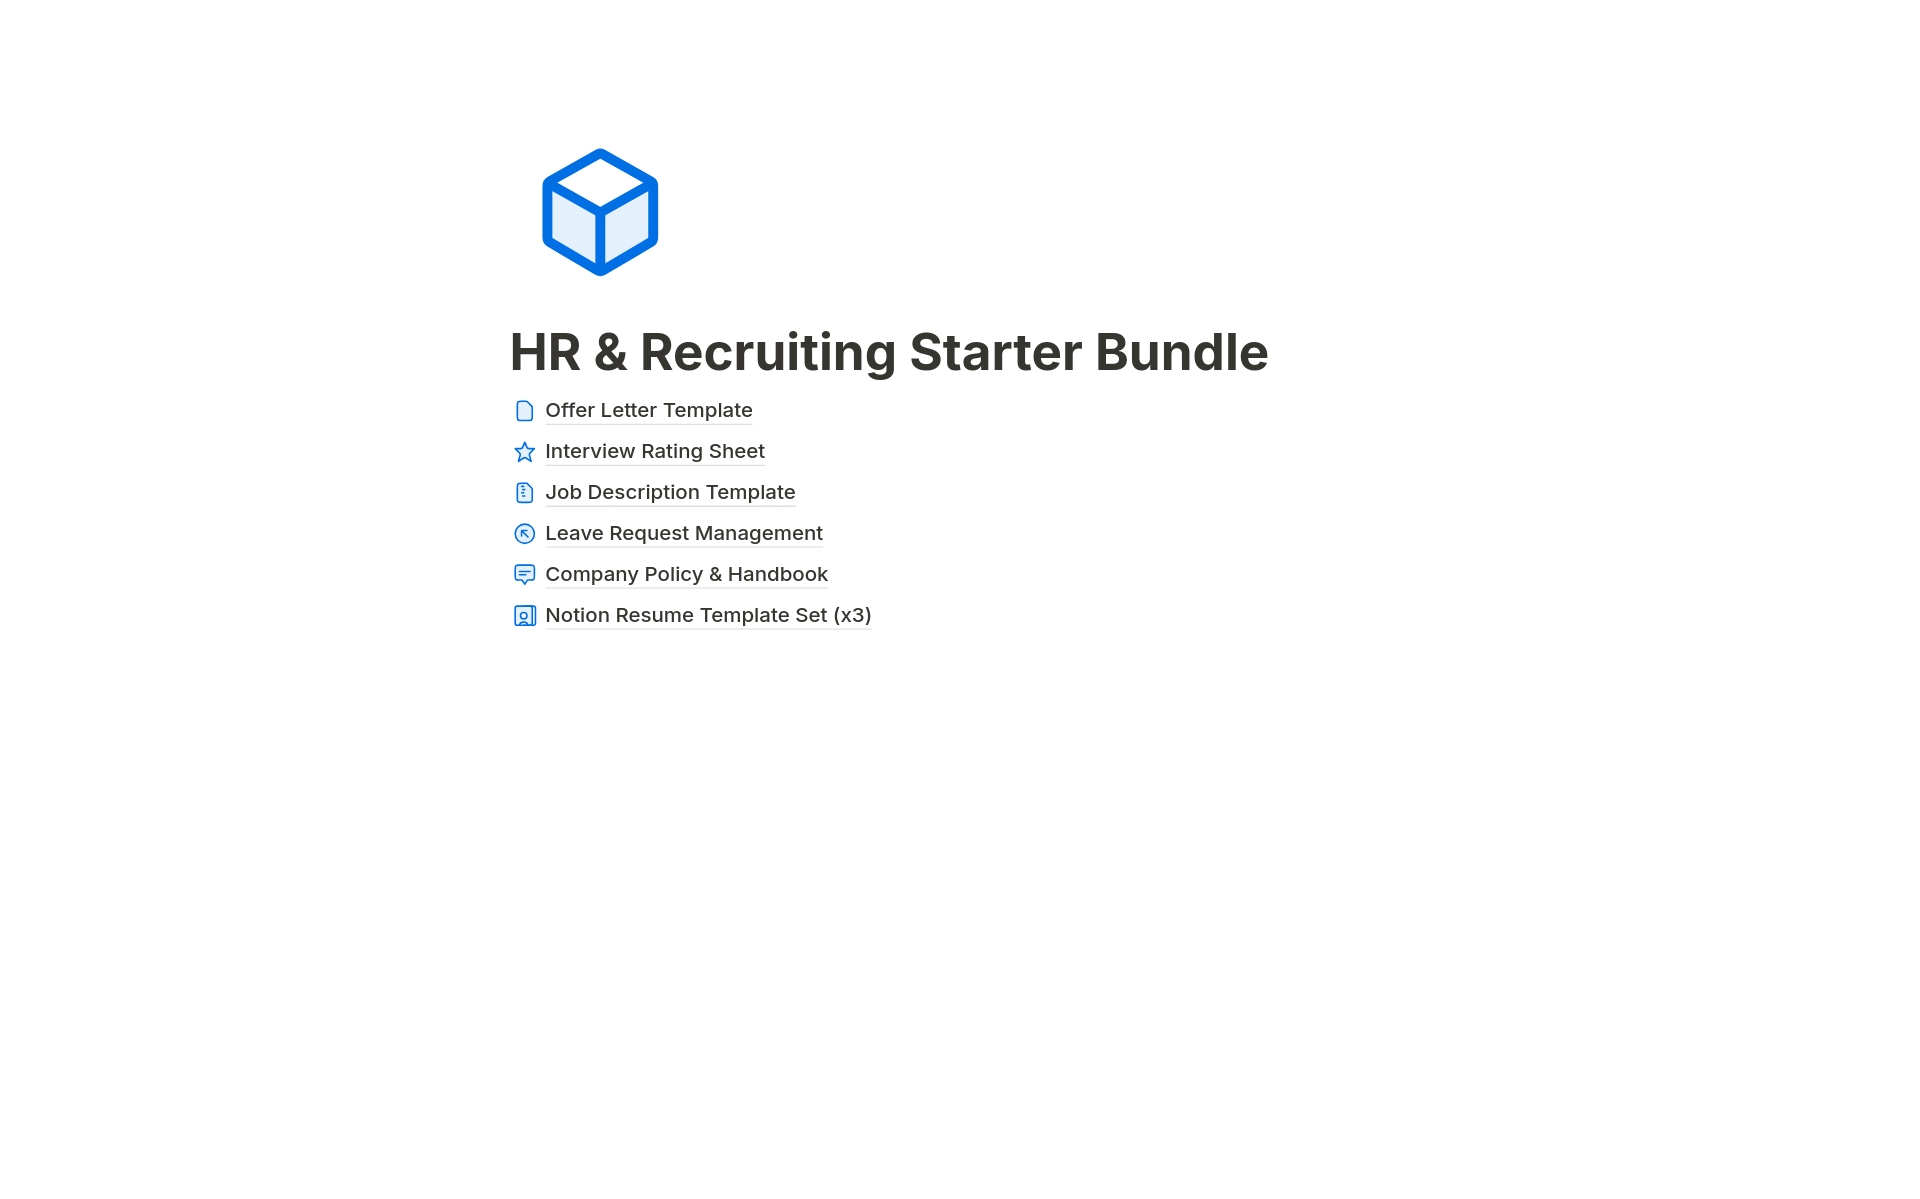 Elevate Your HR & Recruiting Process with Notion's All-In-One Toolkit